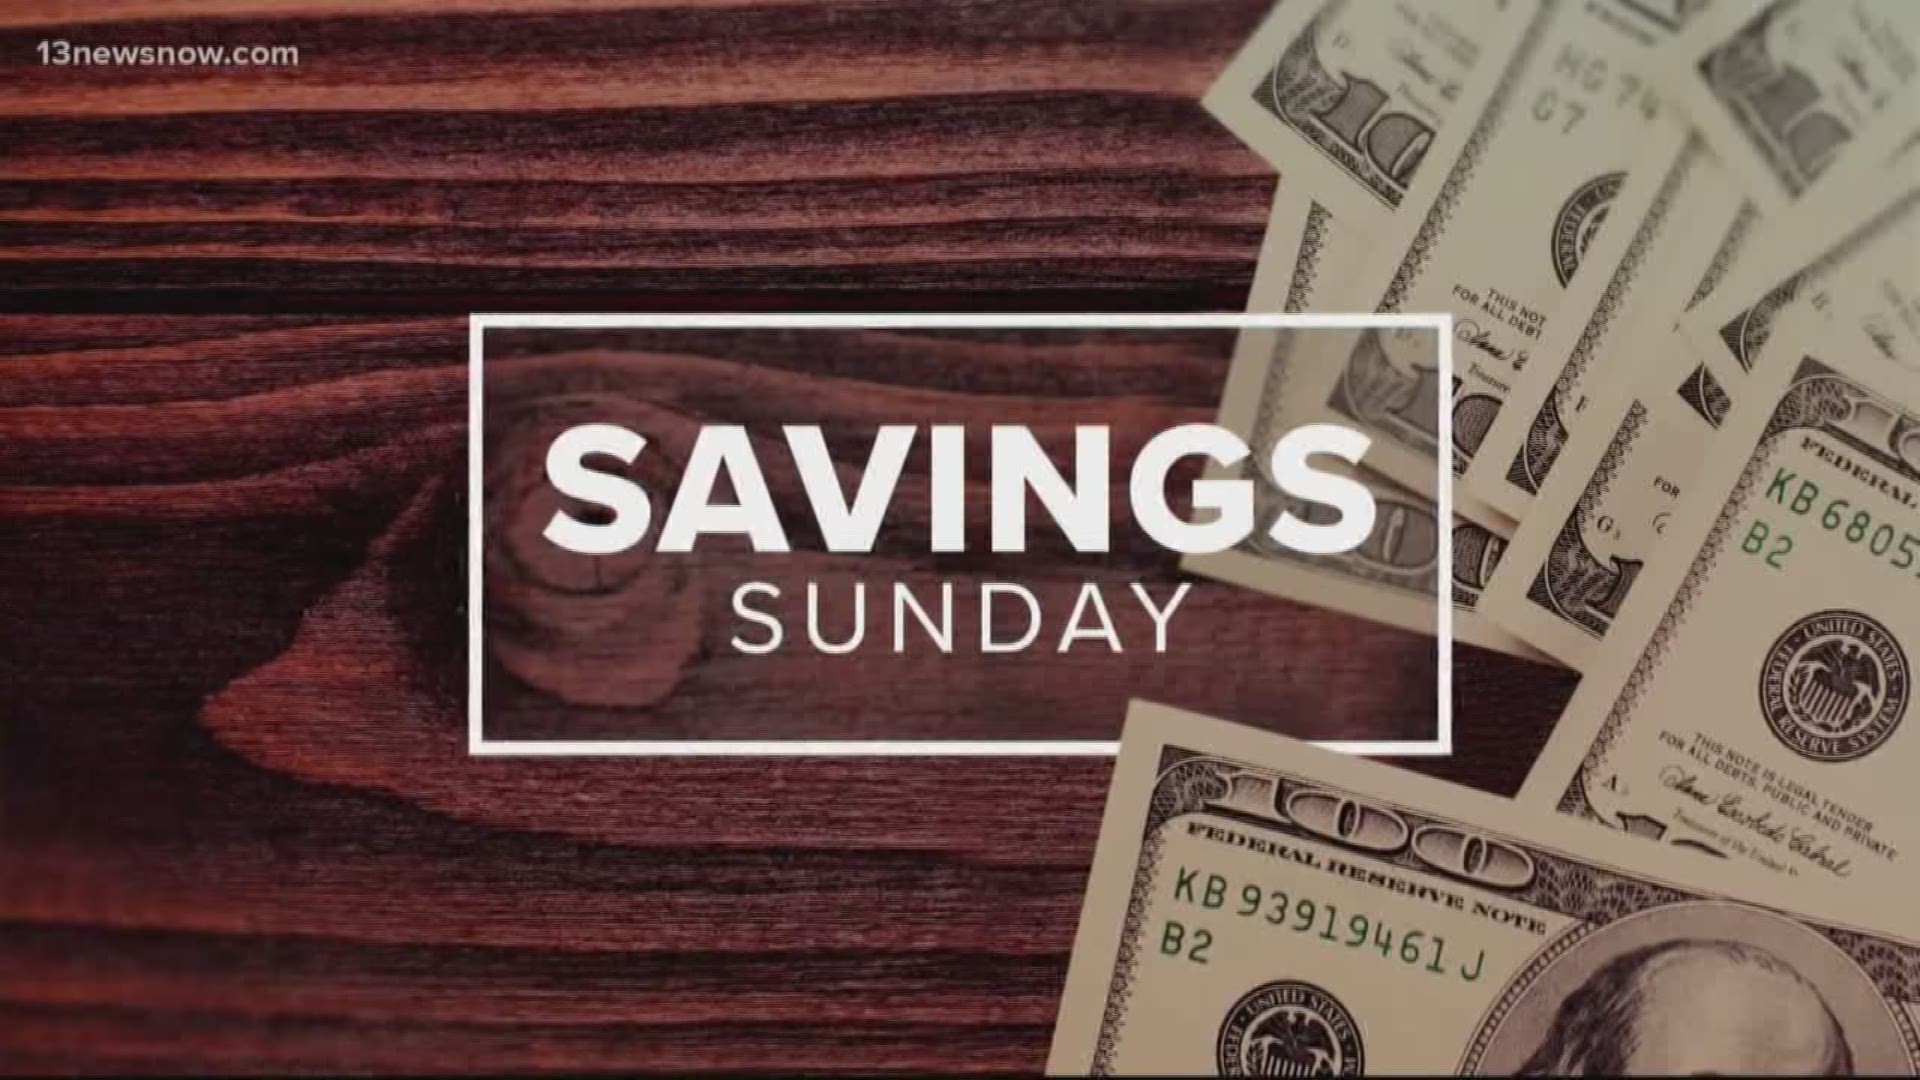 Laura Oliver from www.afrugalchick.com has your big savings for the week of May 5, 2019.